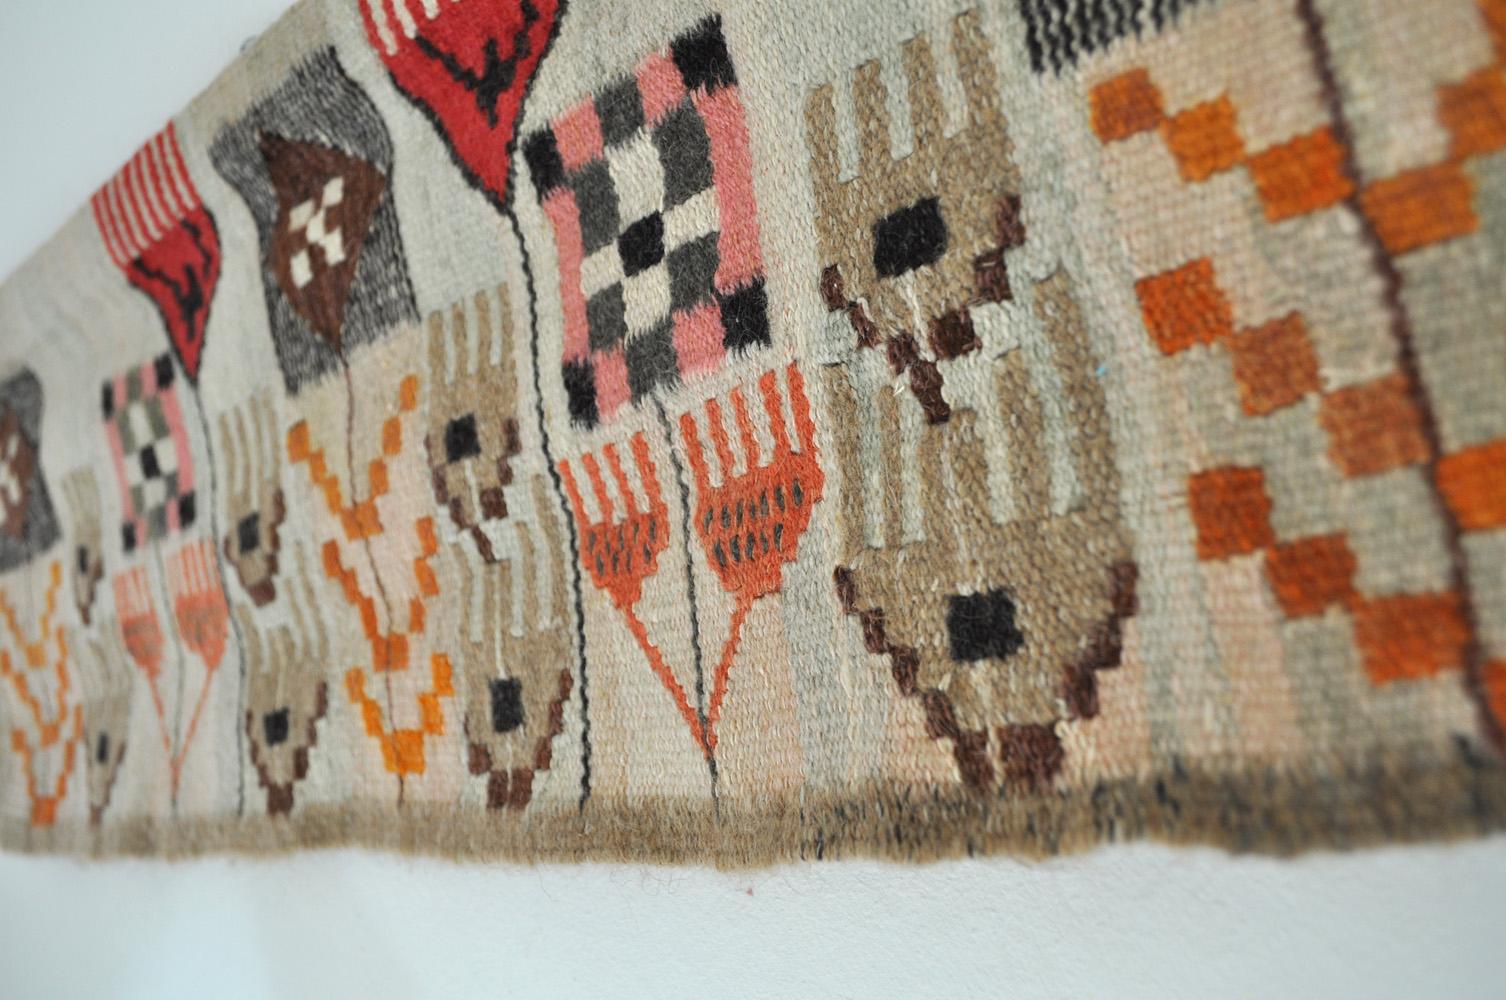 Mid-Century Modern Scandinavian wall tapestry
Handmade by Danish artist Mette Birckner in the late 1960s

Very good vintage condition only slight traces of use
Materials: Wool and linen.

Dimensions: 
64 L x 22 H x 1 D cm.